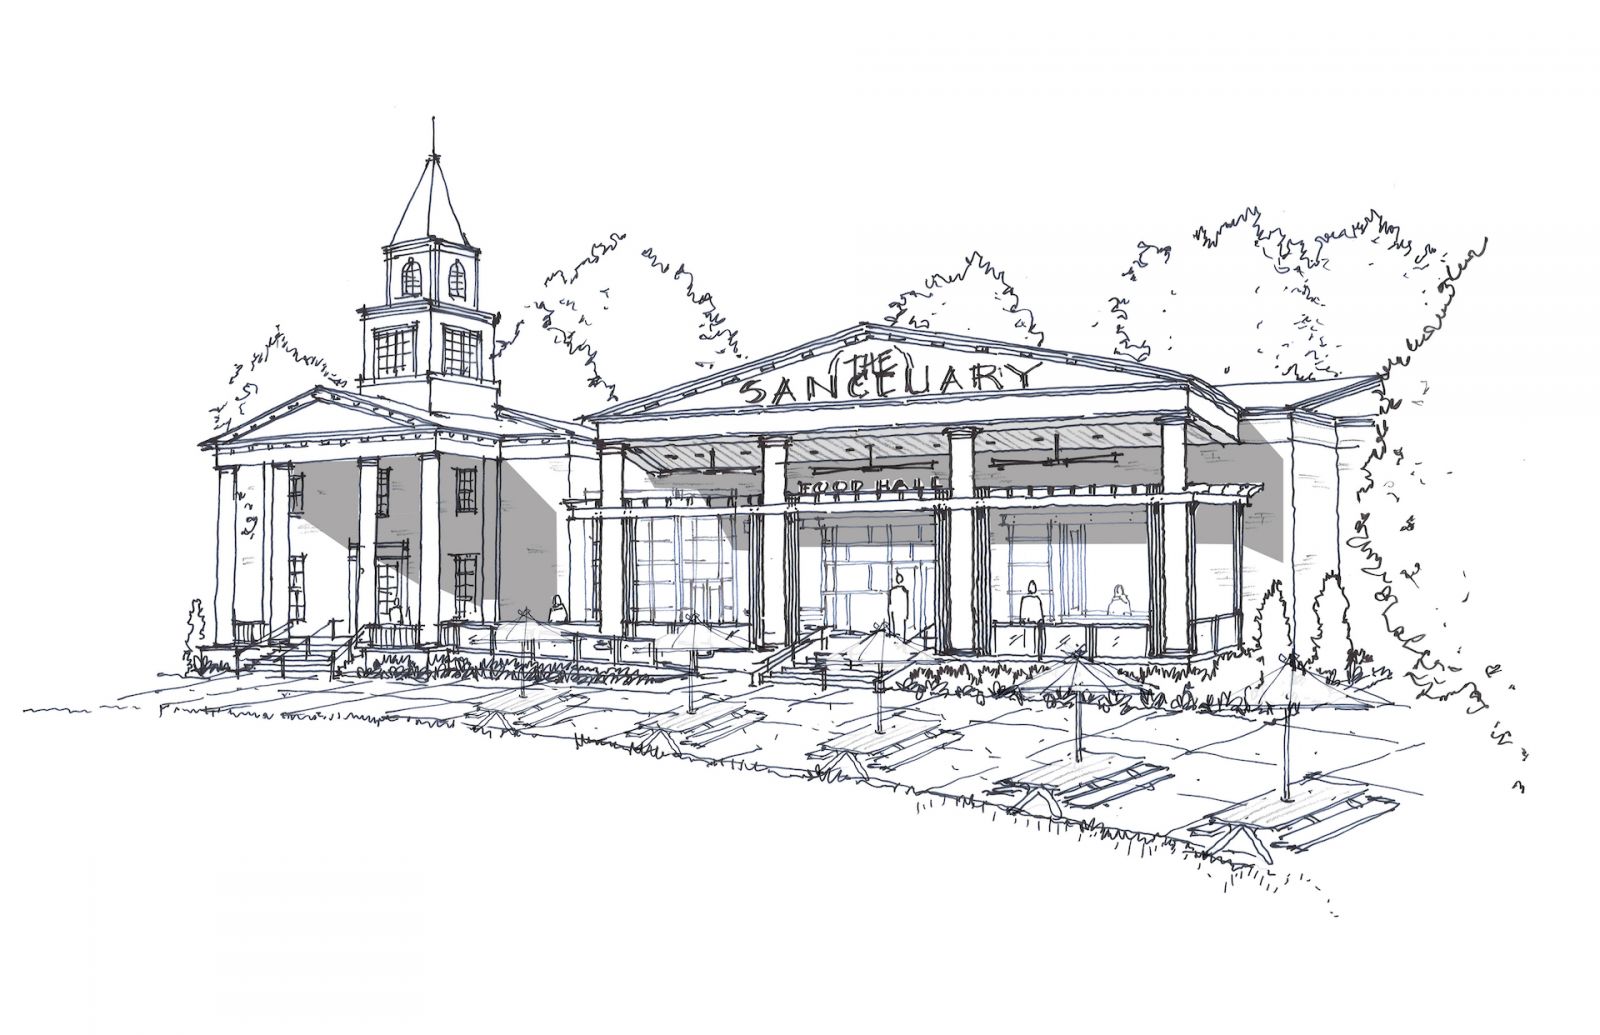 Sanctuary Food Hall is slated to open in 2023 in the BullStreet District's historic chapel. (Rendering/Provided)